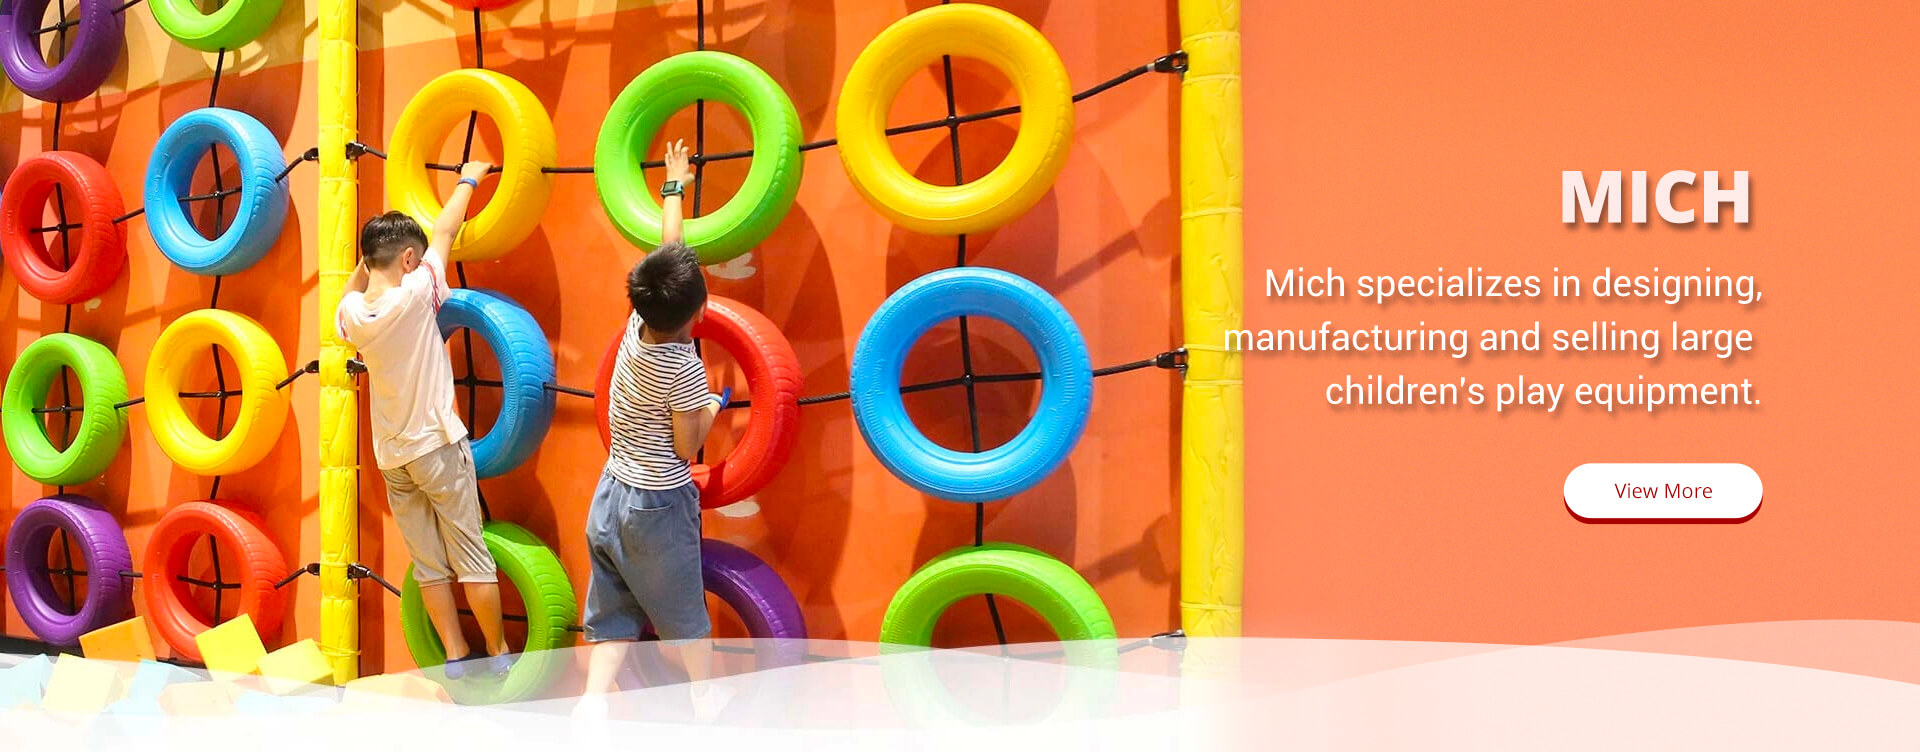 Mich specializes in designing manufacturing and selling large children's play equipment